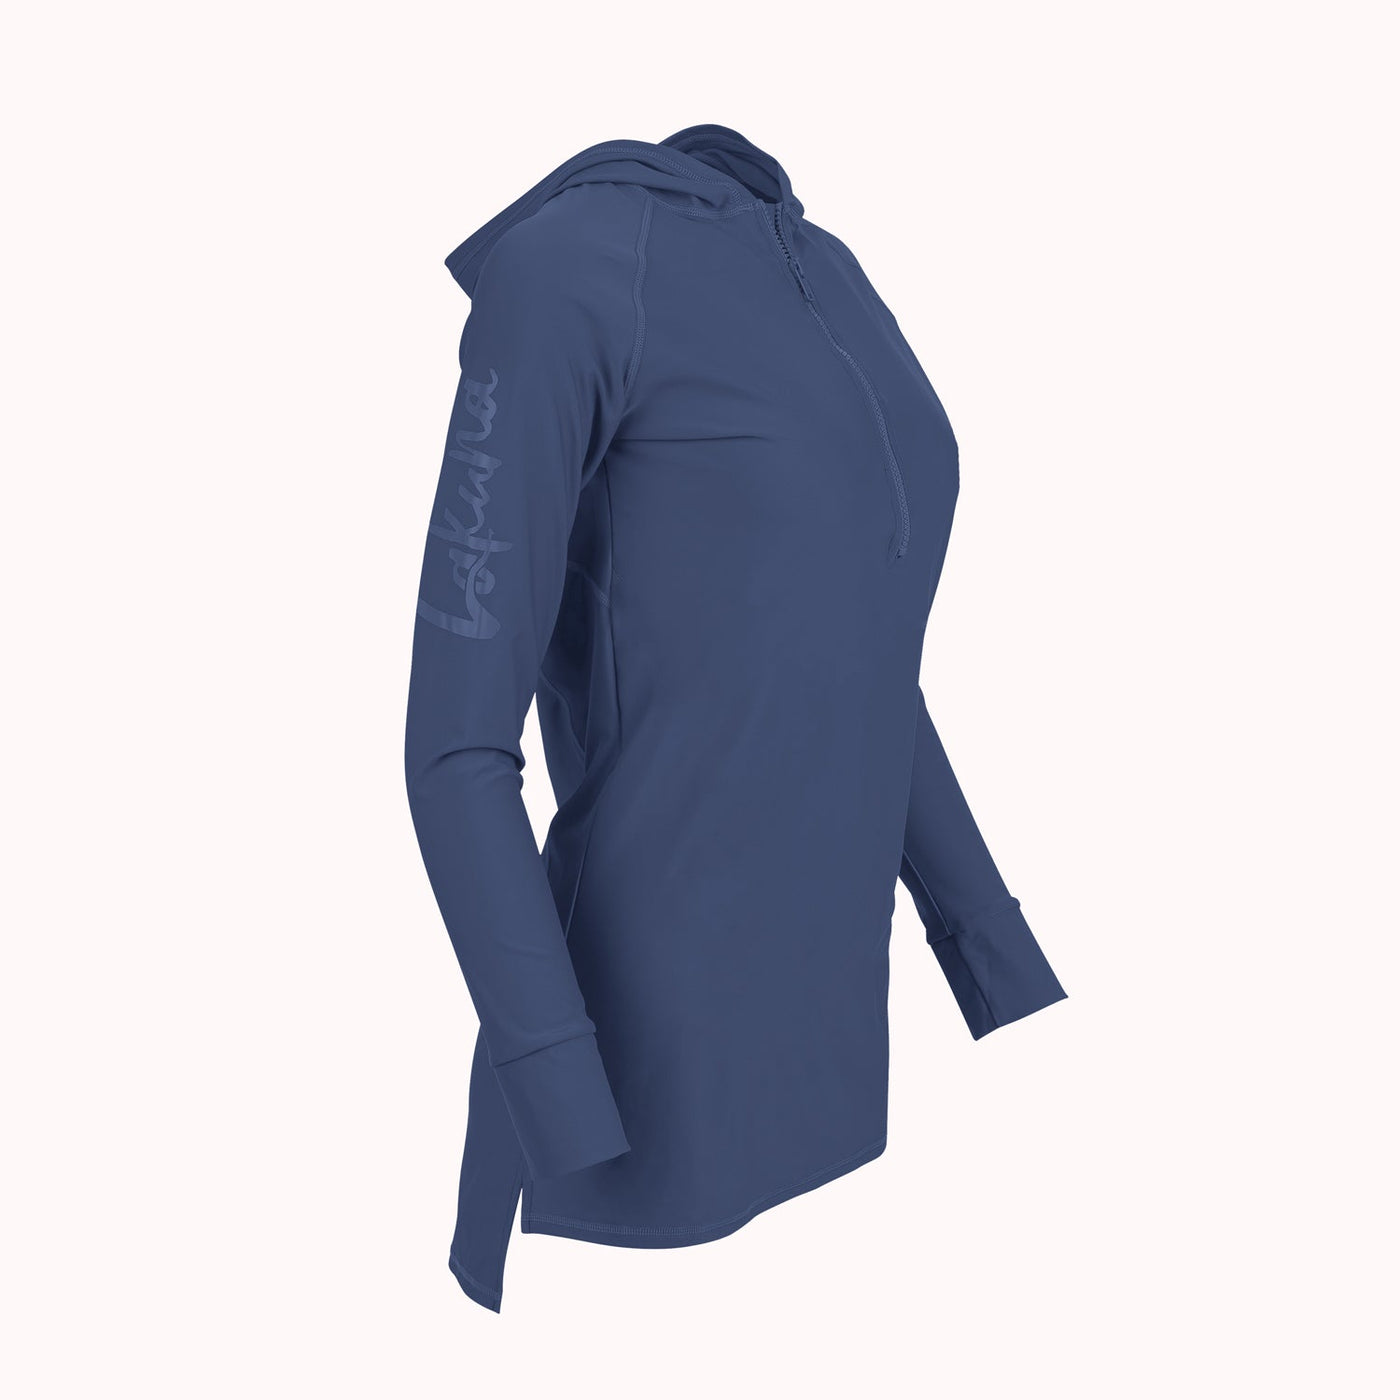 New Blue Hooded Swim tunic with pocket